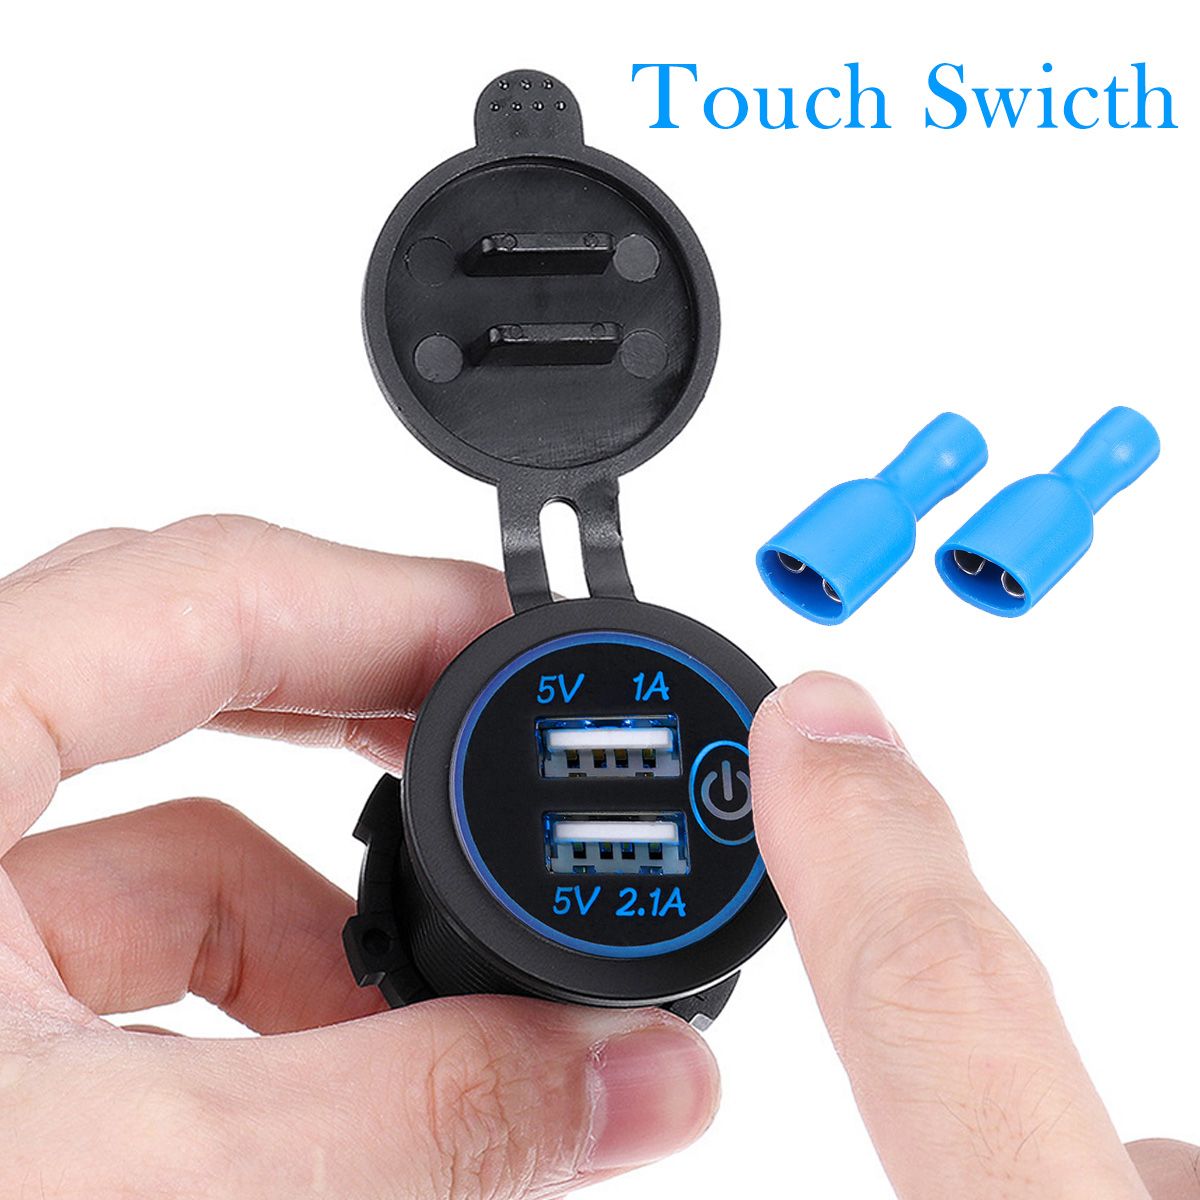 P8-S-Touch-Switch-with-Terminal-21A1A-Dual-USB-Car-motorized-Motor-Home-Modified-Charger-Phone-12-24-1534302